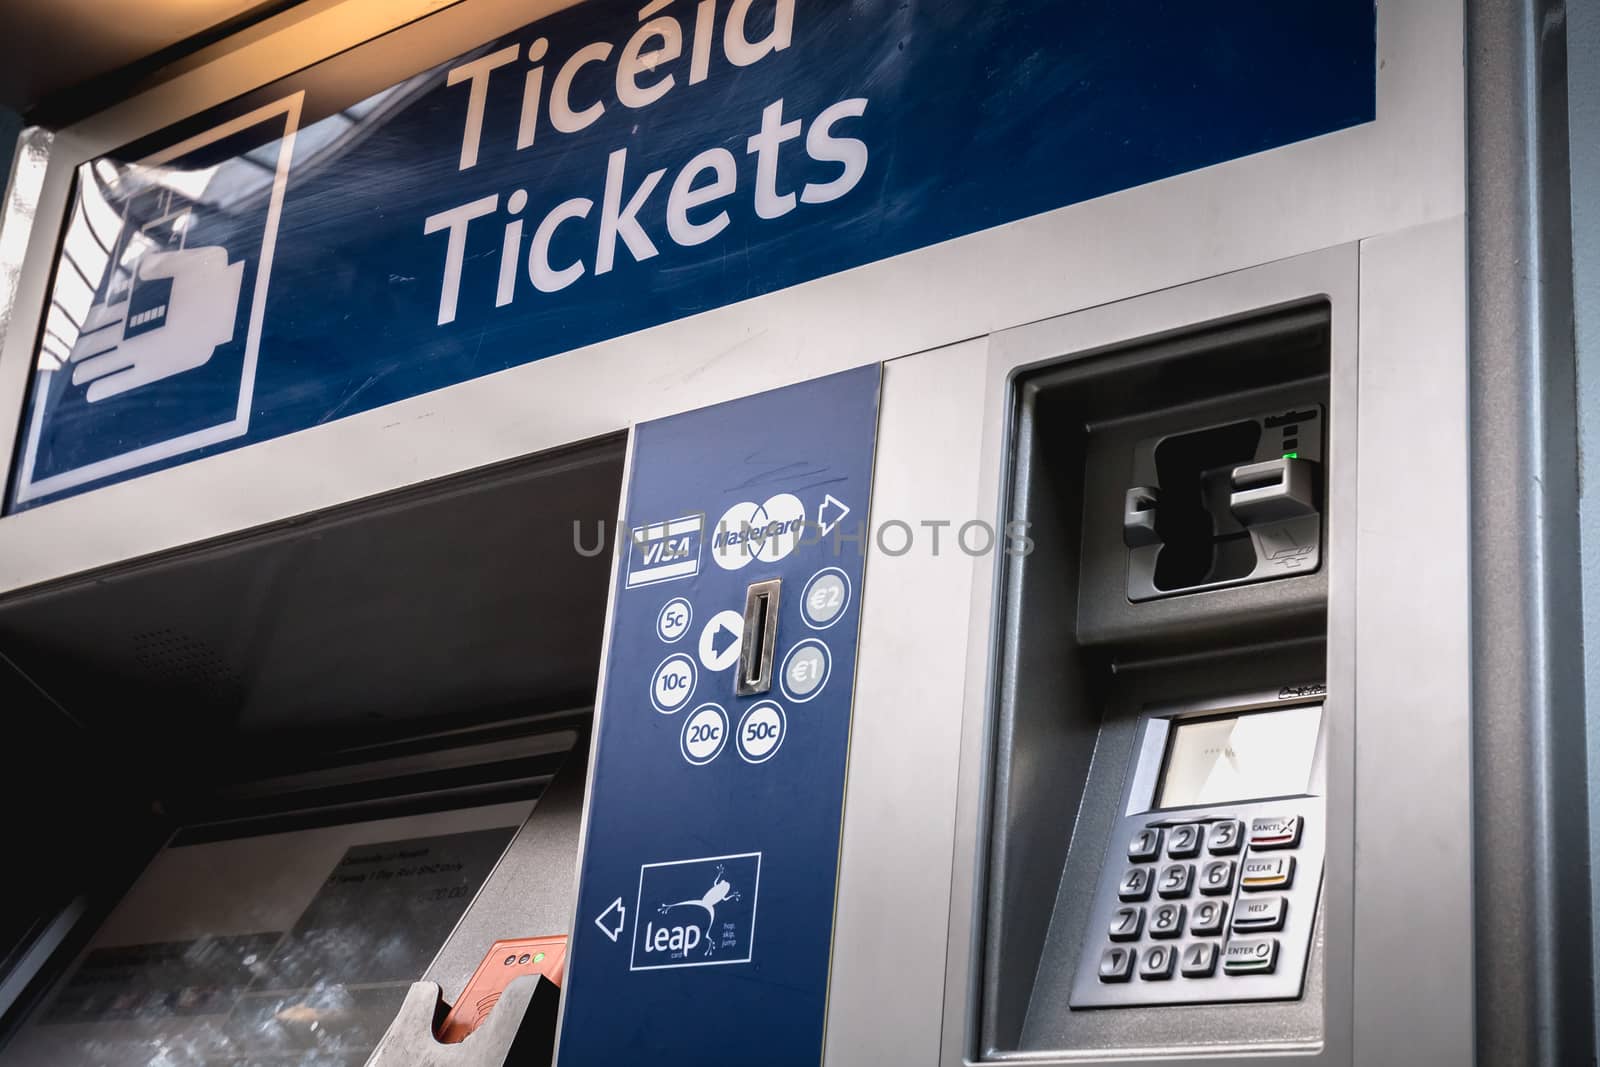 Automatic ticket purchase machine in Connolly DART train station by AtlanticEUROSTOXX